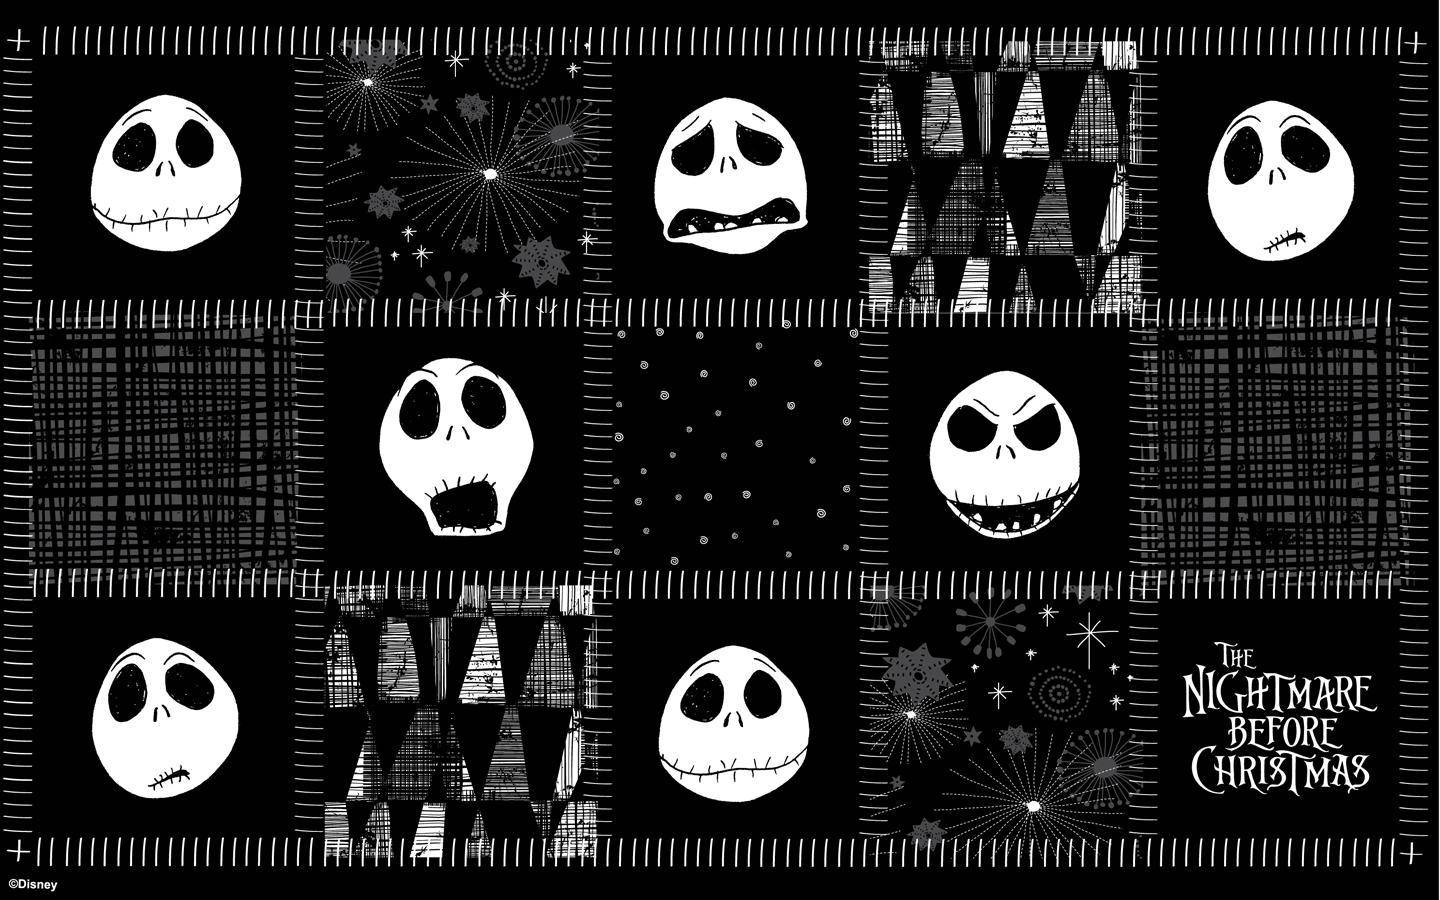 The Nightmare Before Christmas Faces Of Jack